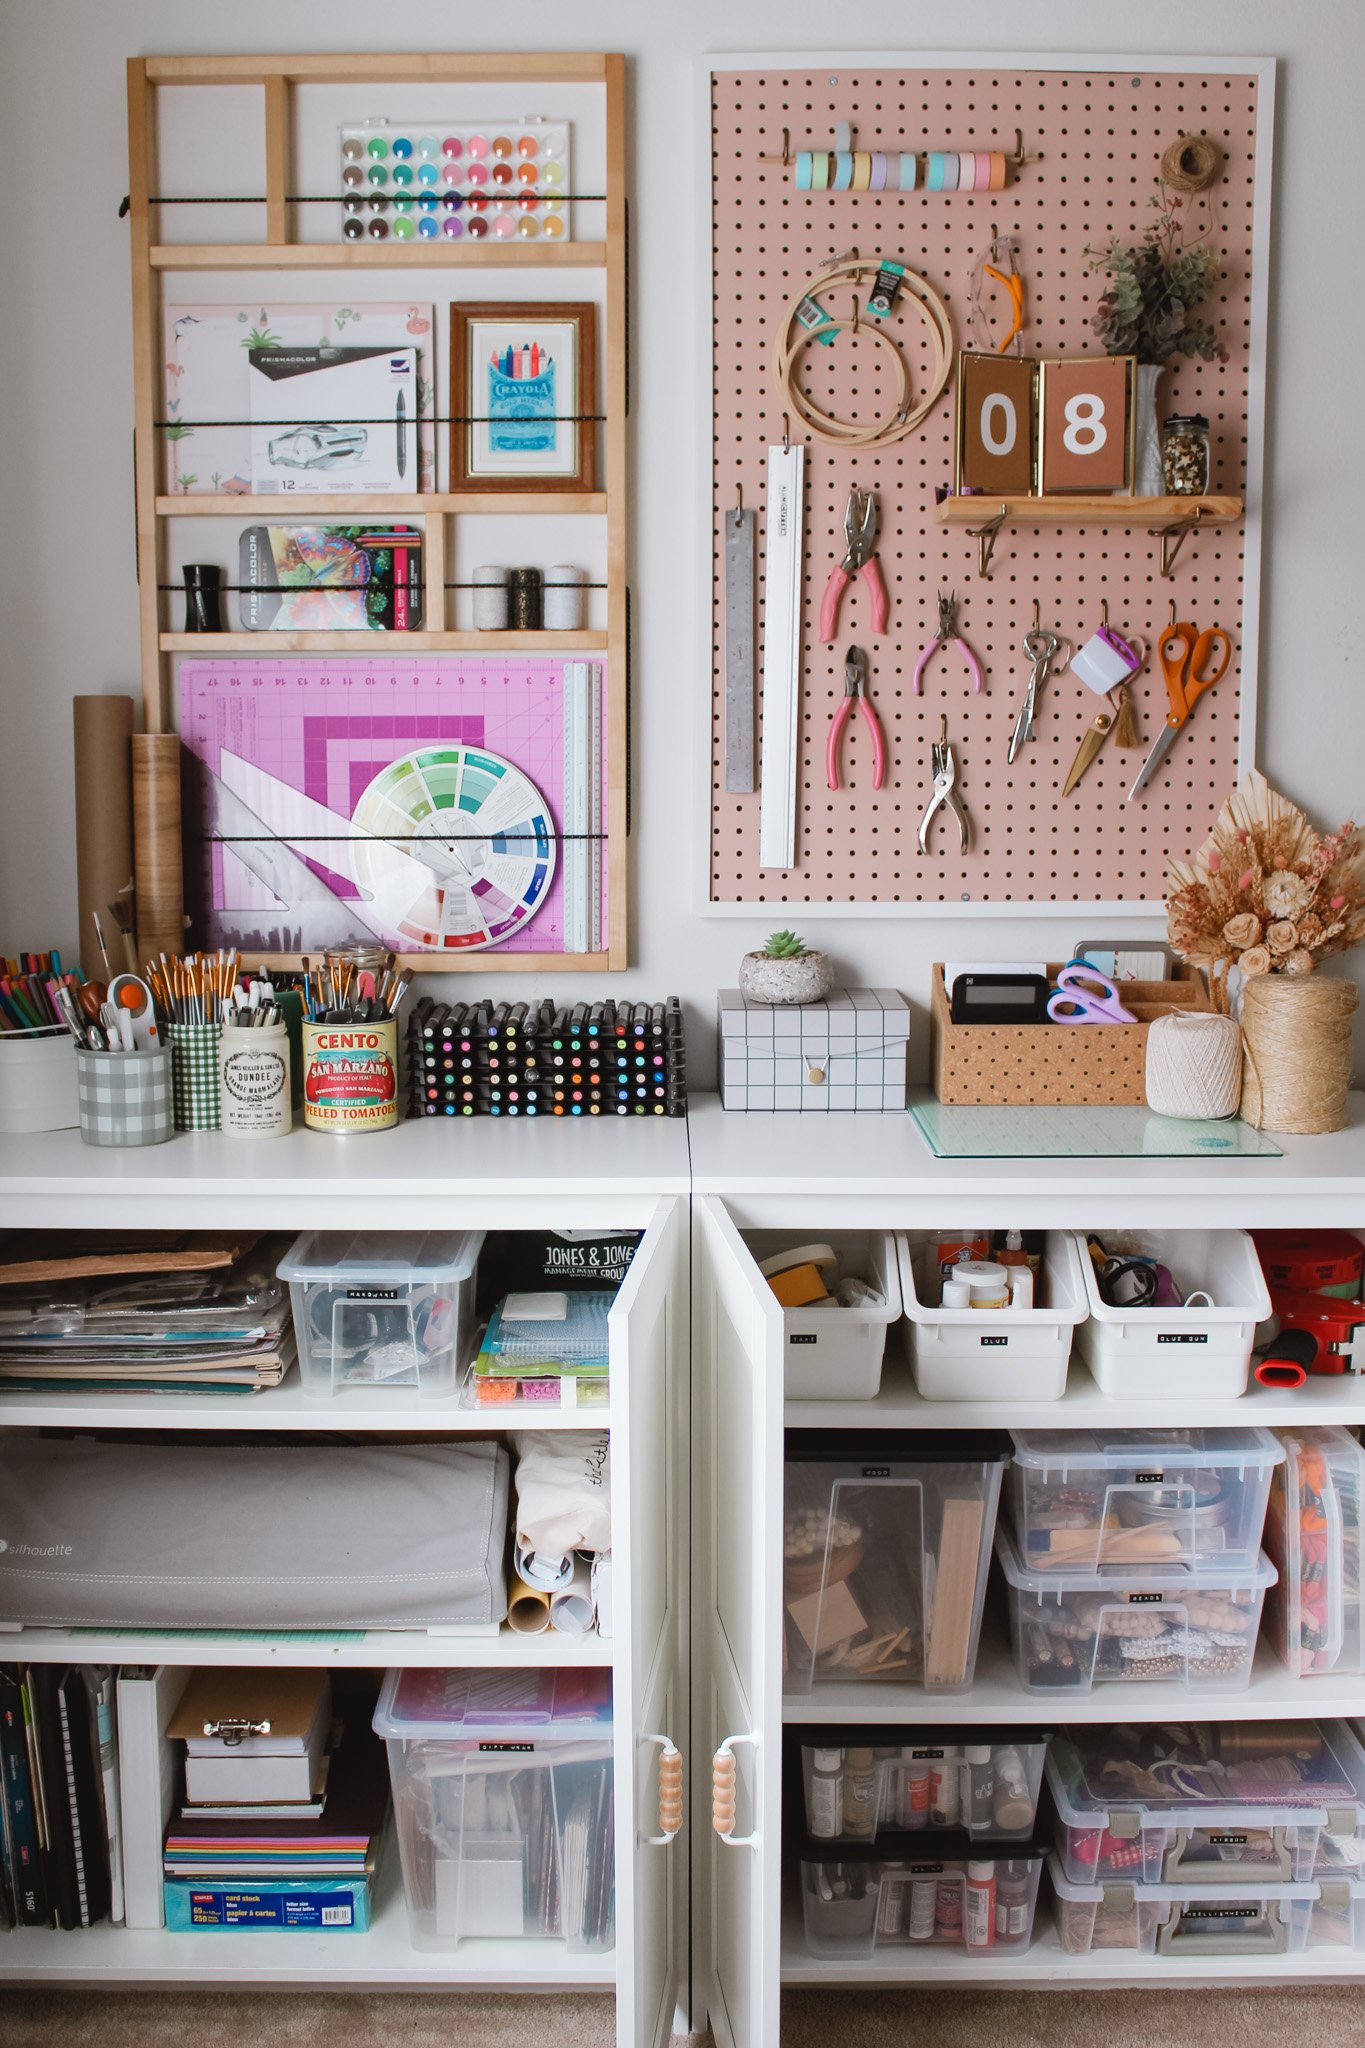 The Best Way to Organize Art and Craft Supplies - The Simplicity Habit